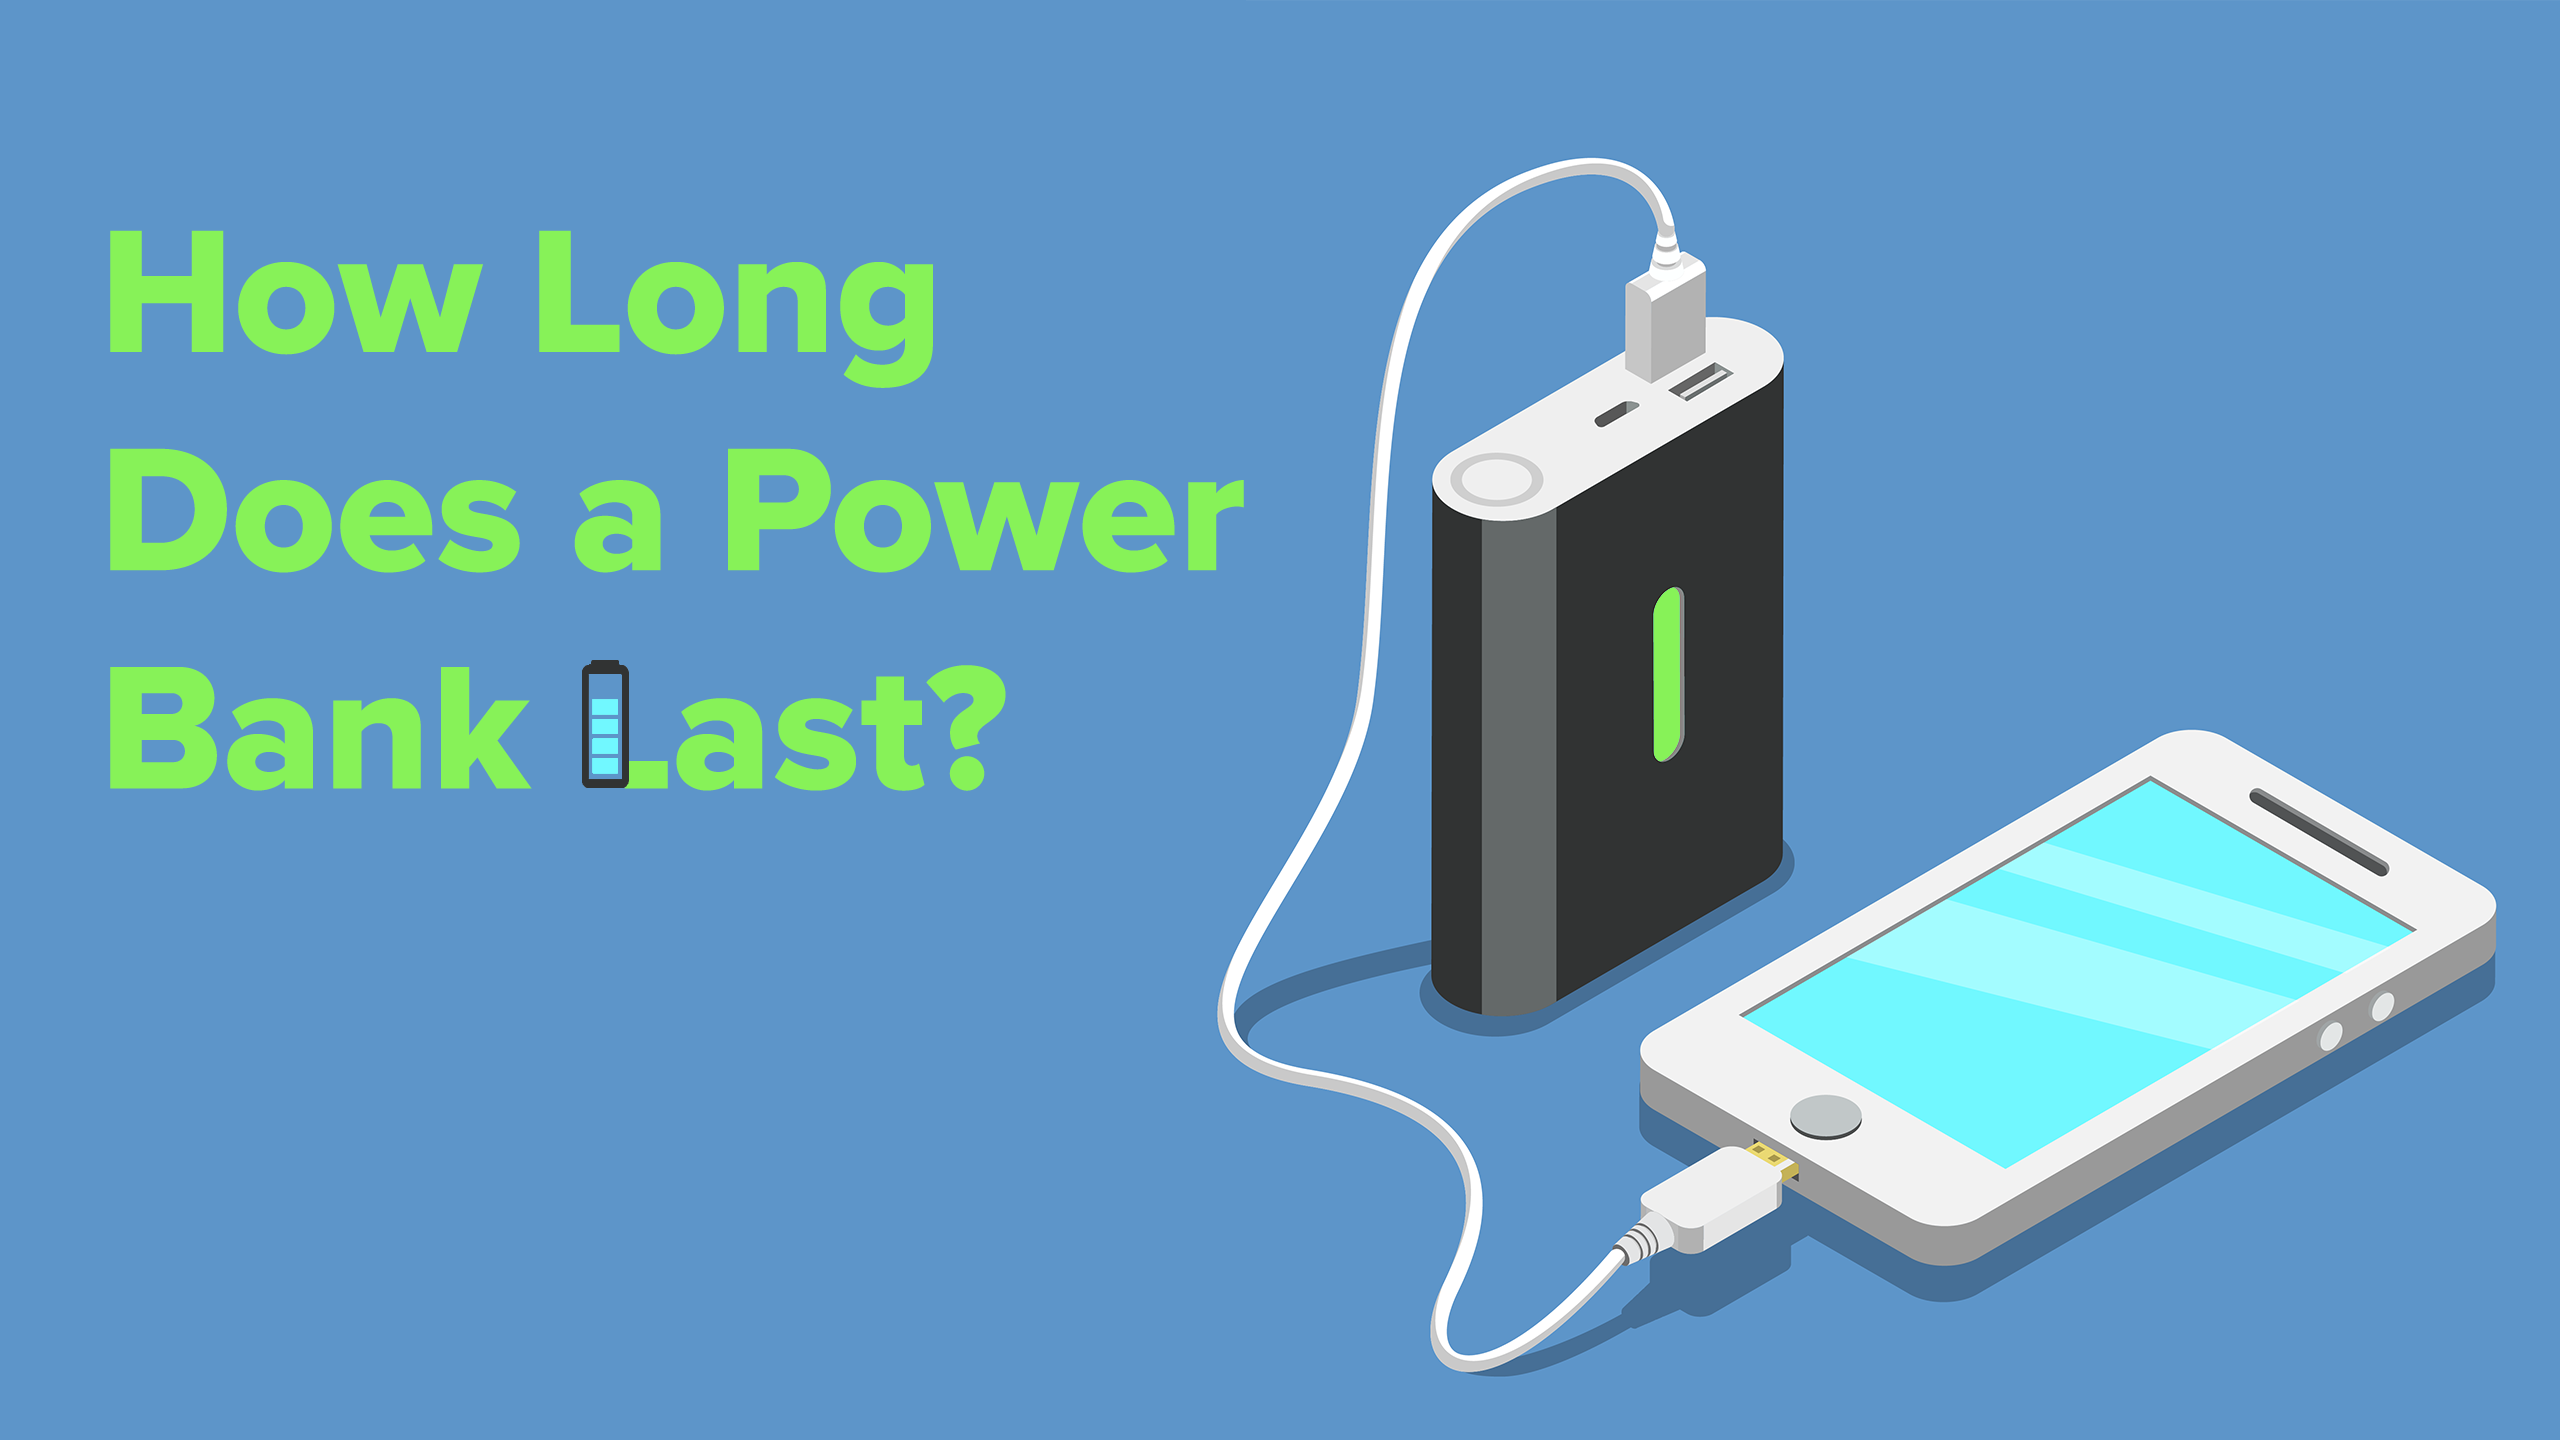 How Long Does a Power Bank Last?